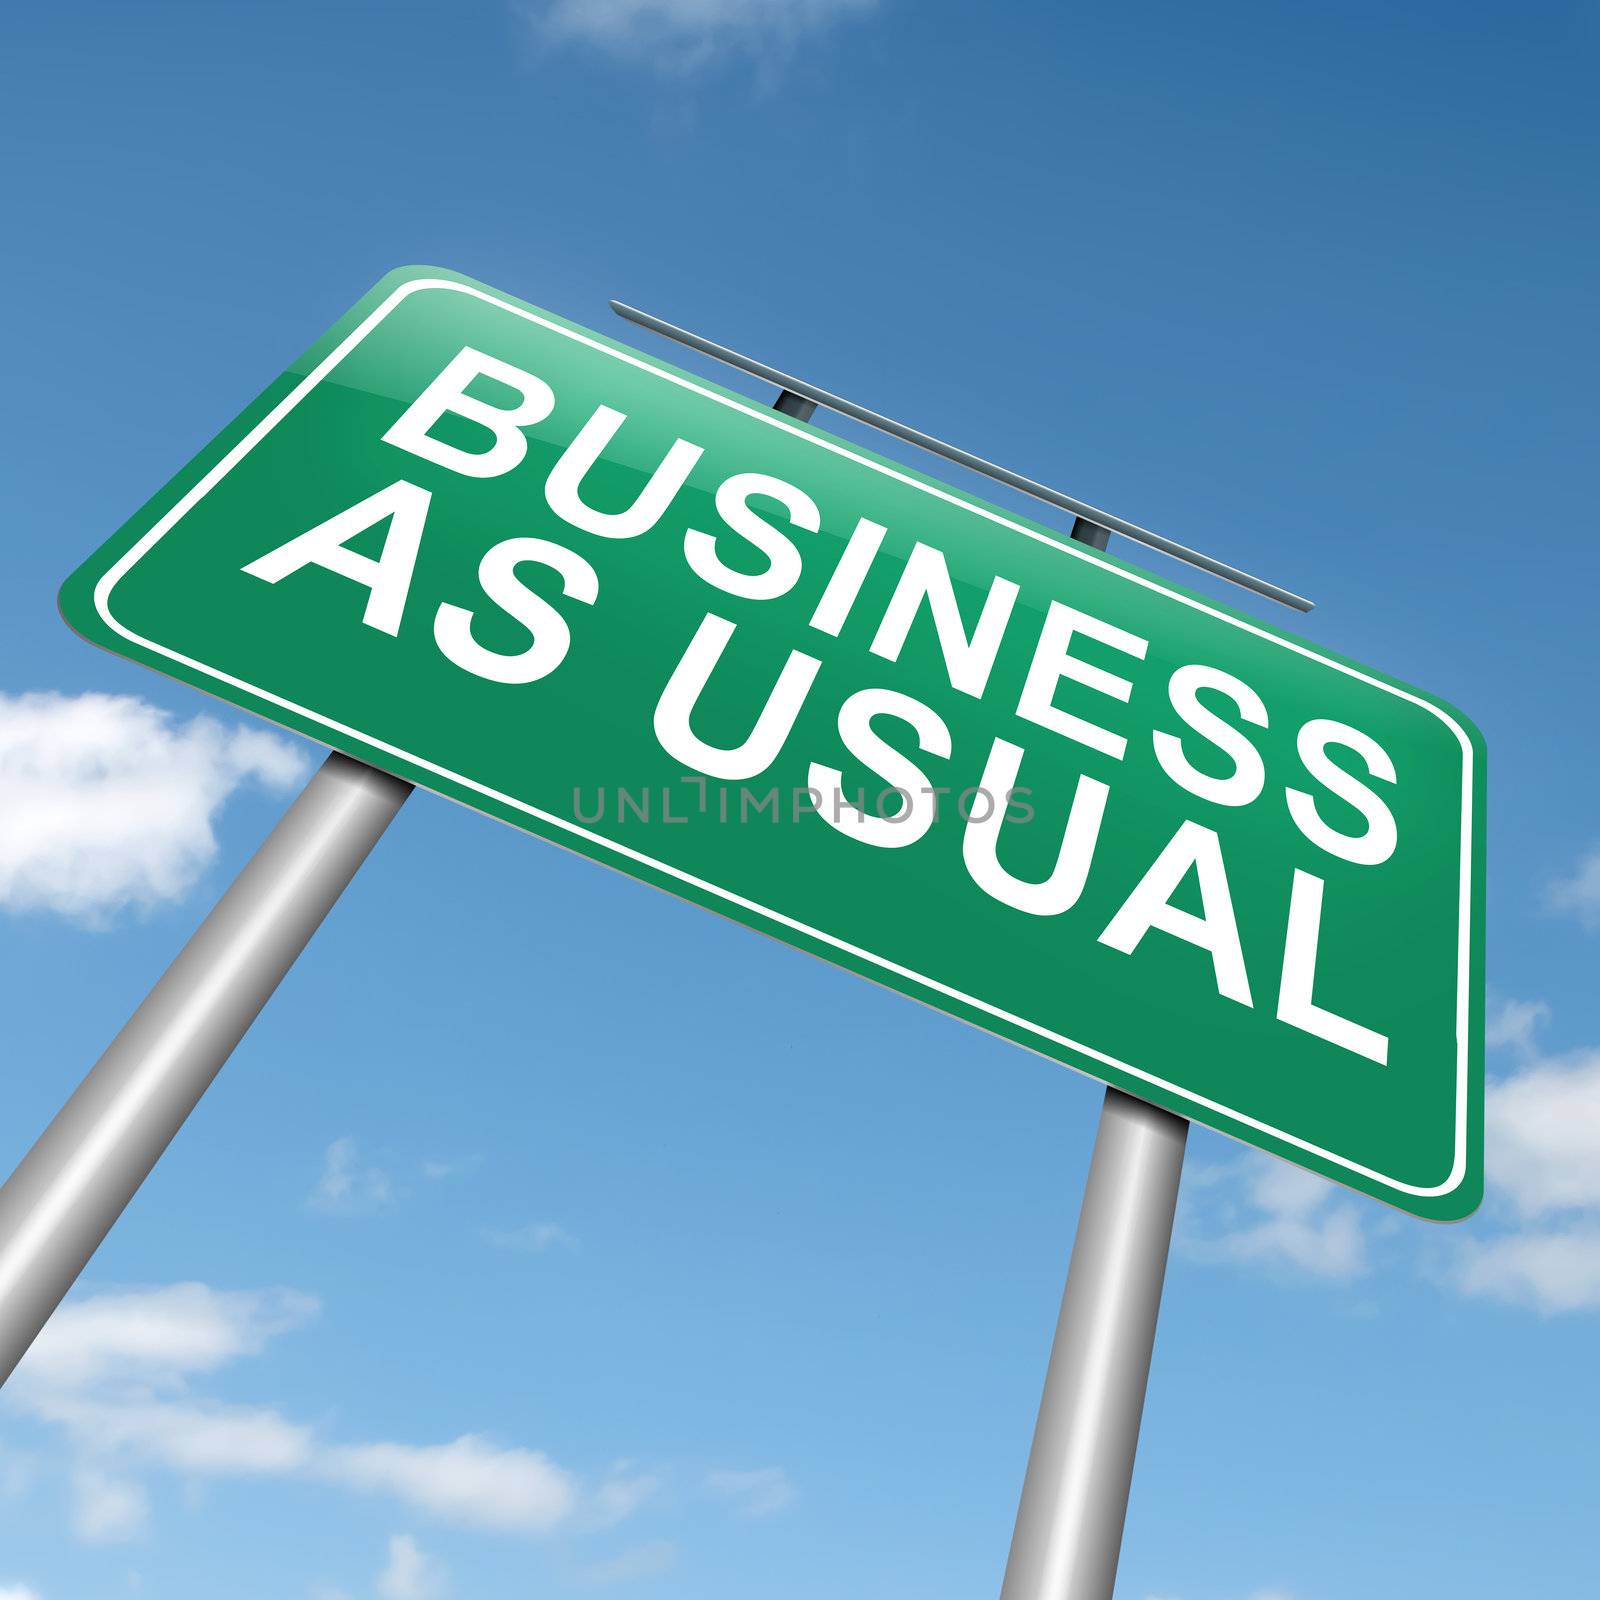 Illustration depicting a roadsign with a business as usual concept. Sky background.